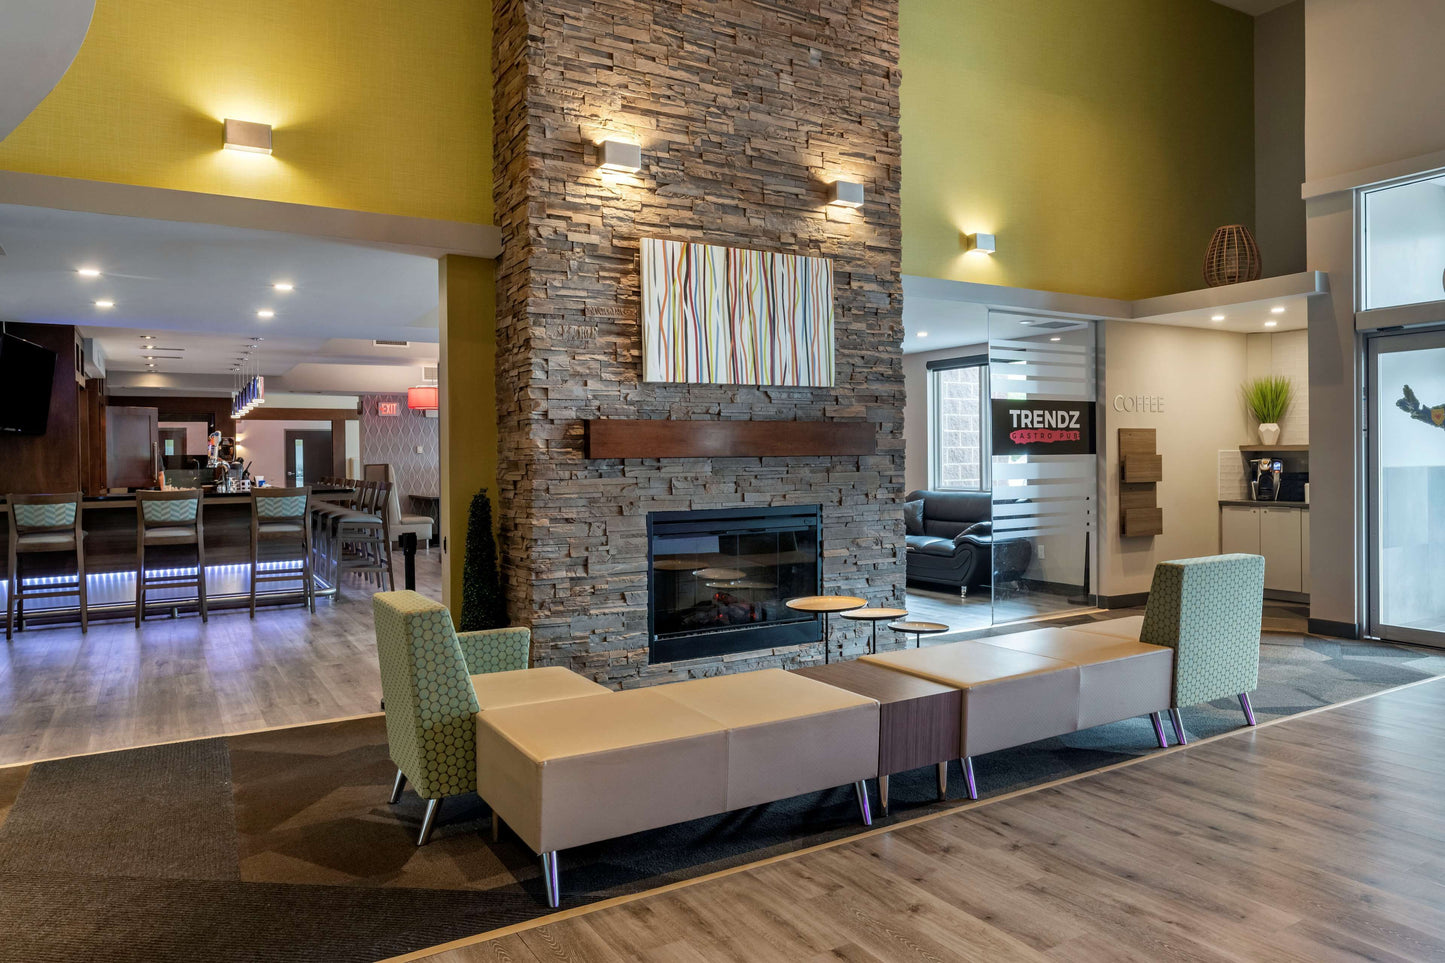 Hotel Review: Best Western Plus Dartmouth Hotel & Suites (Reviews, Pricing & Amenities)